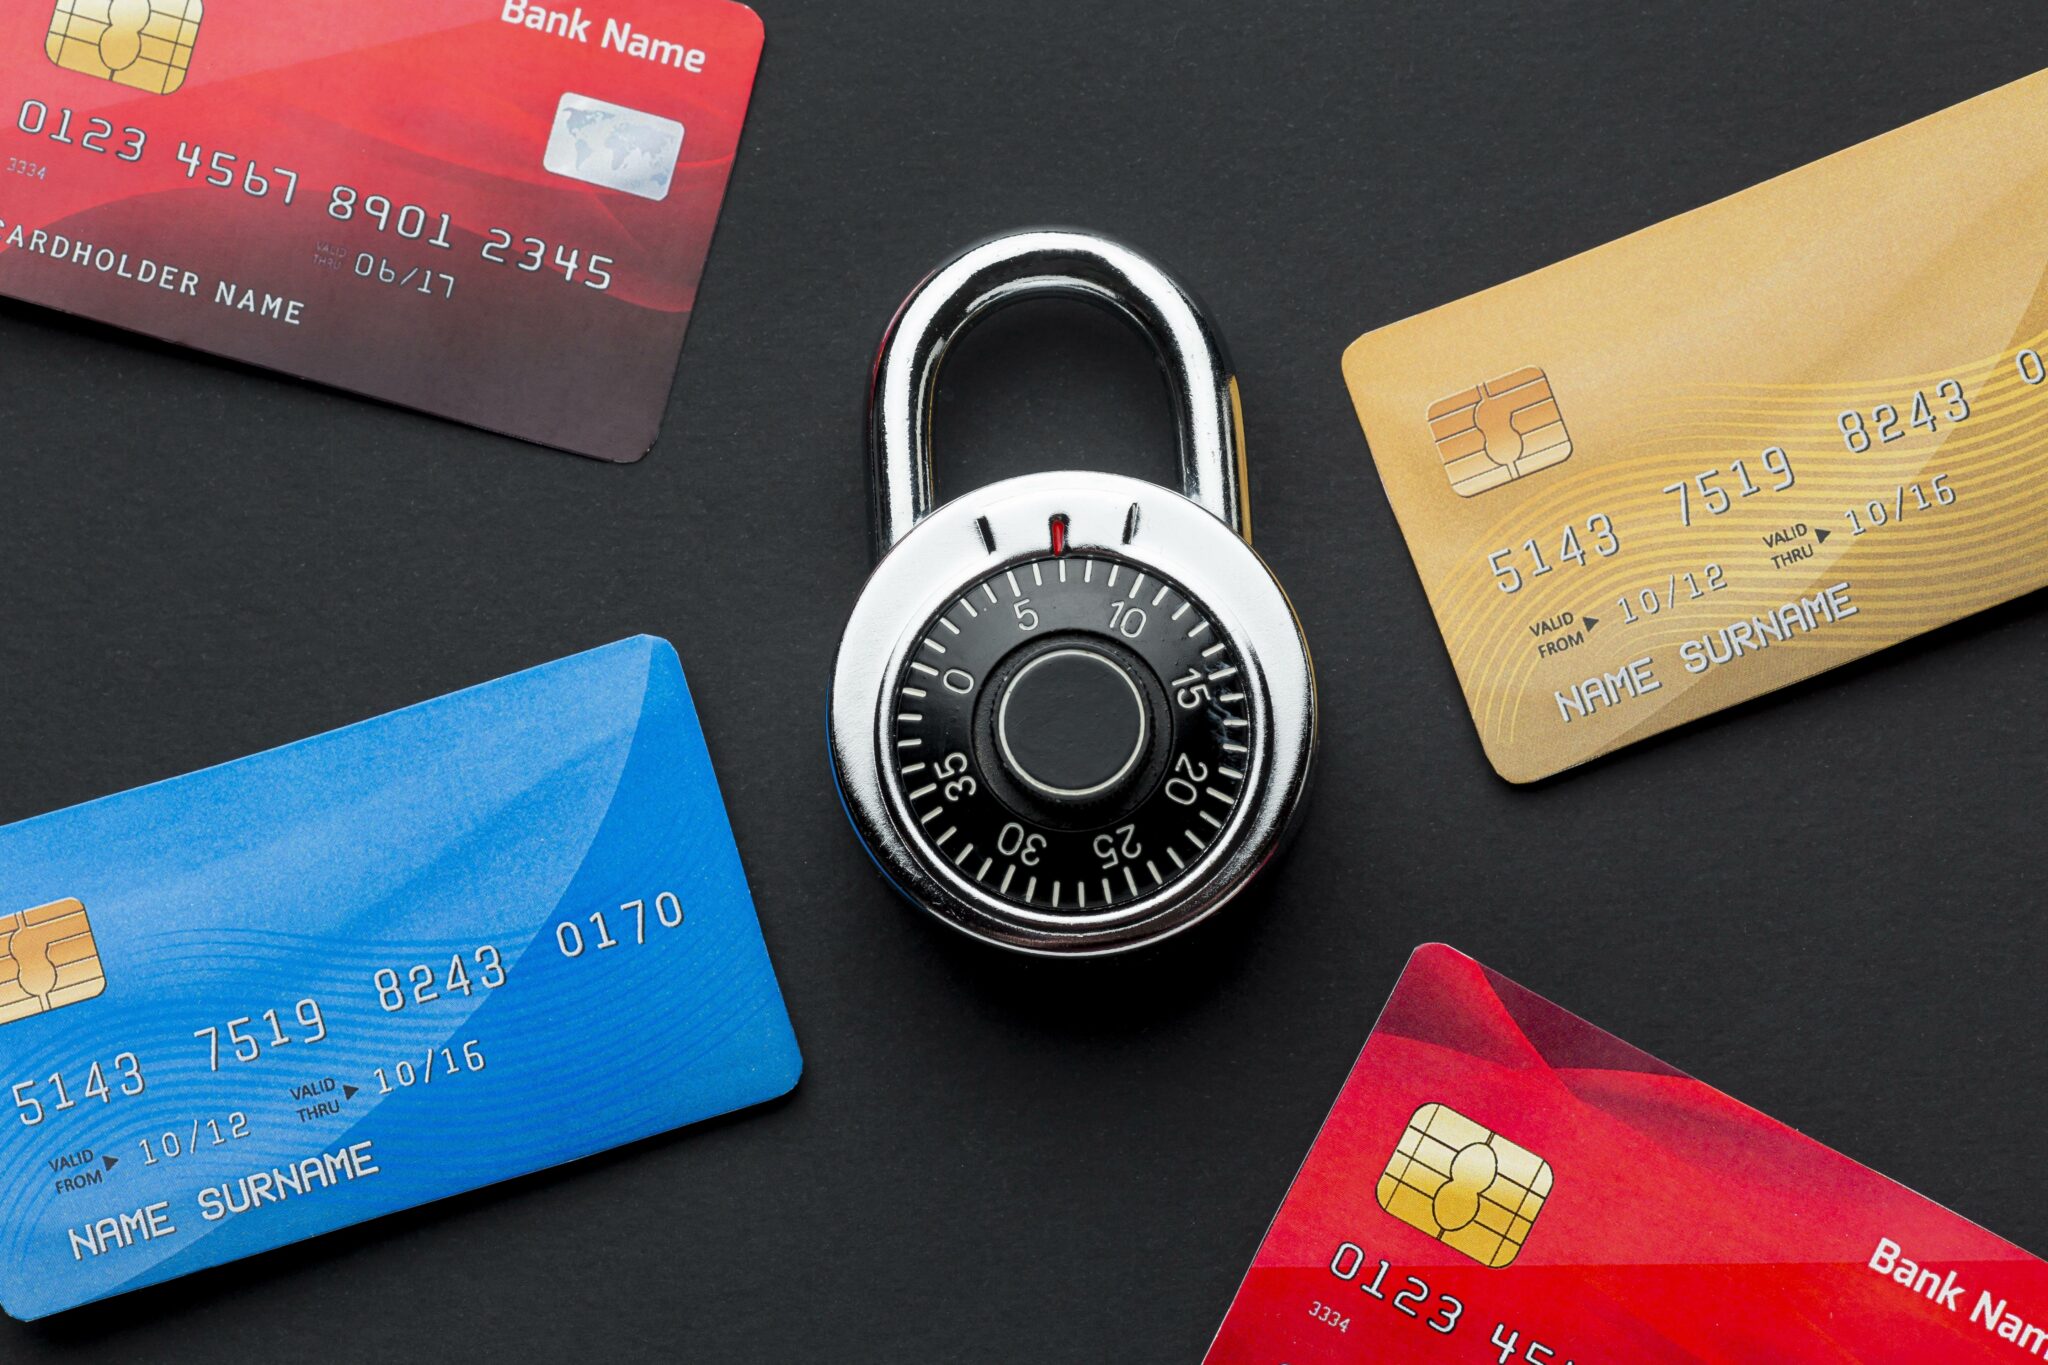 What are the differences between debit cards and credit cards